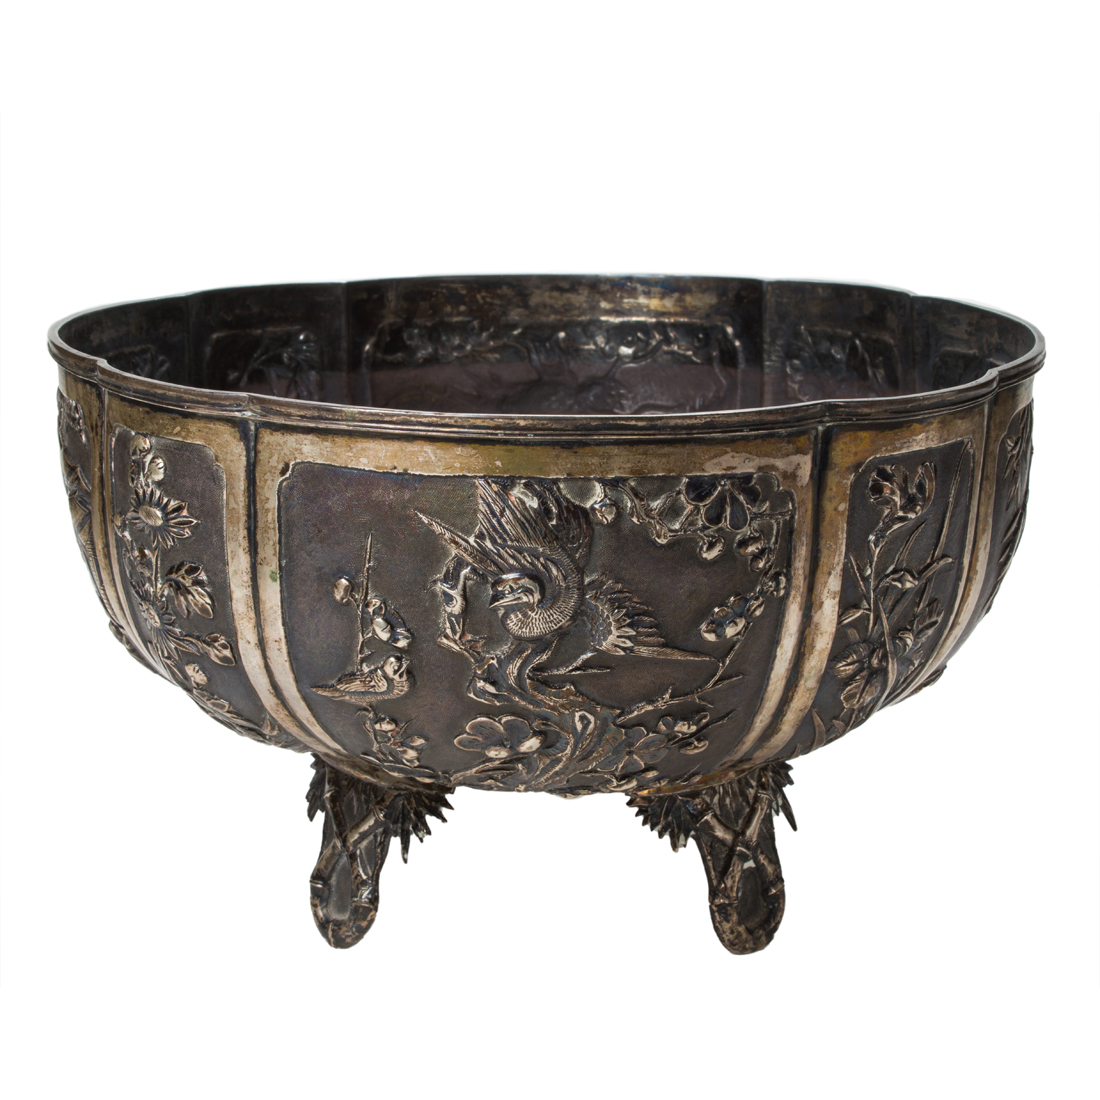 CHINESE EXPORT REPOUSSE SILVER